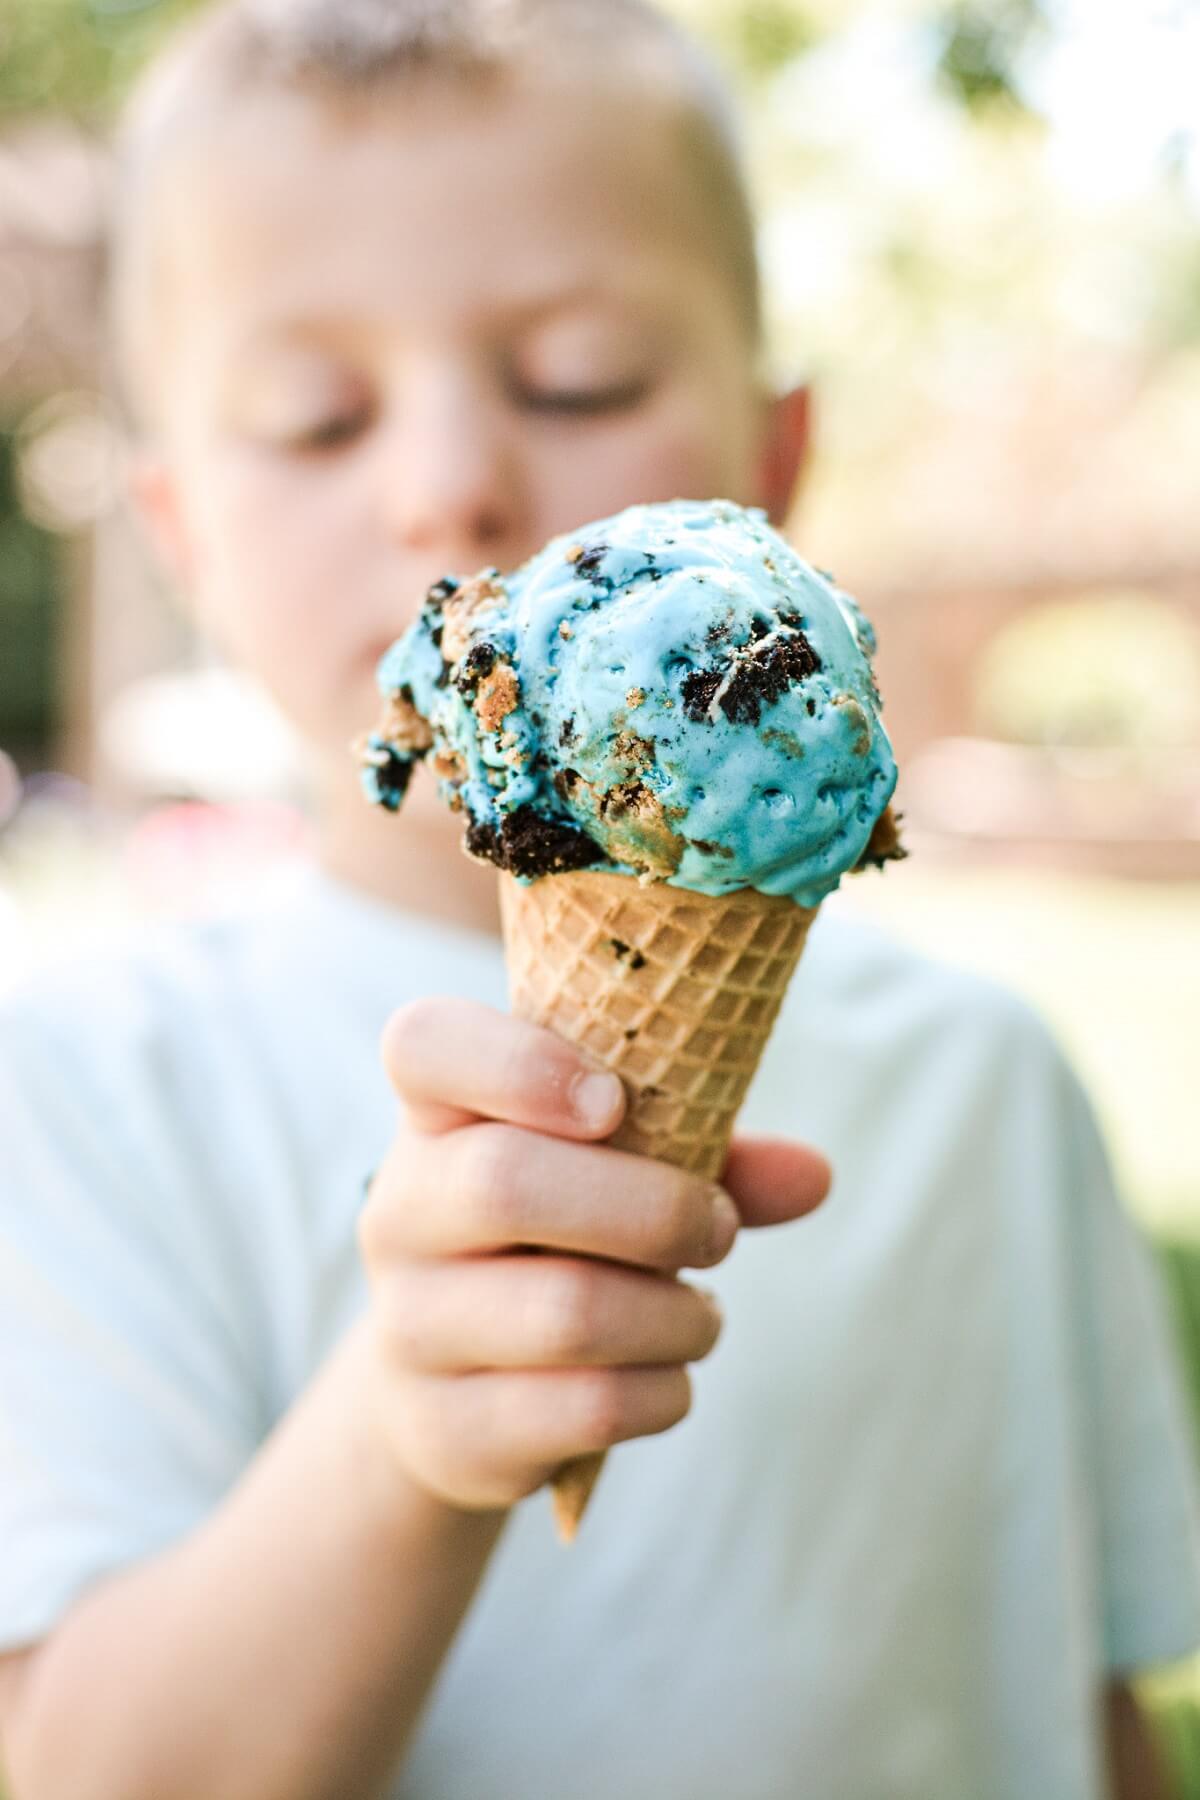 Cookie monster ice cream cone, held by a young boy.